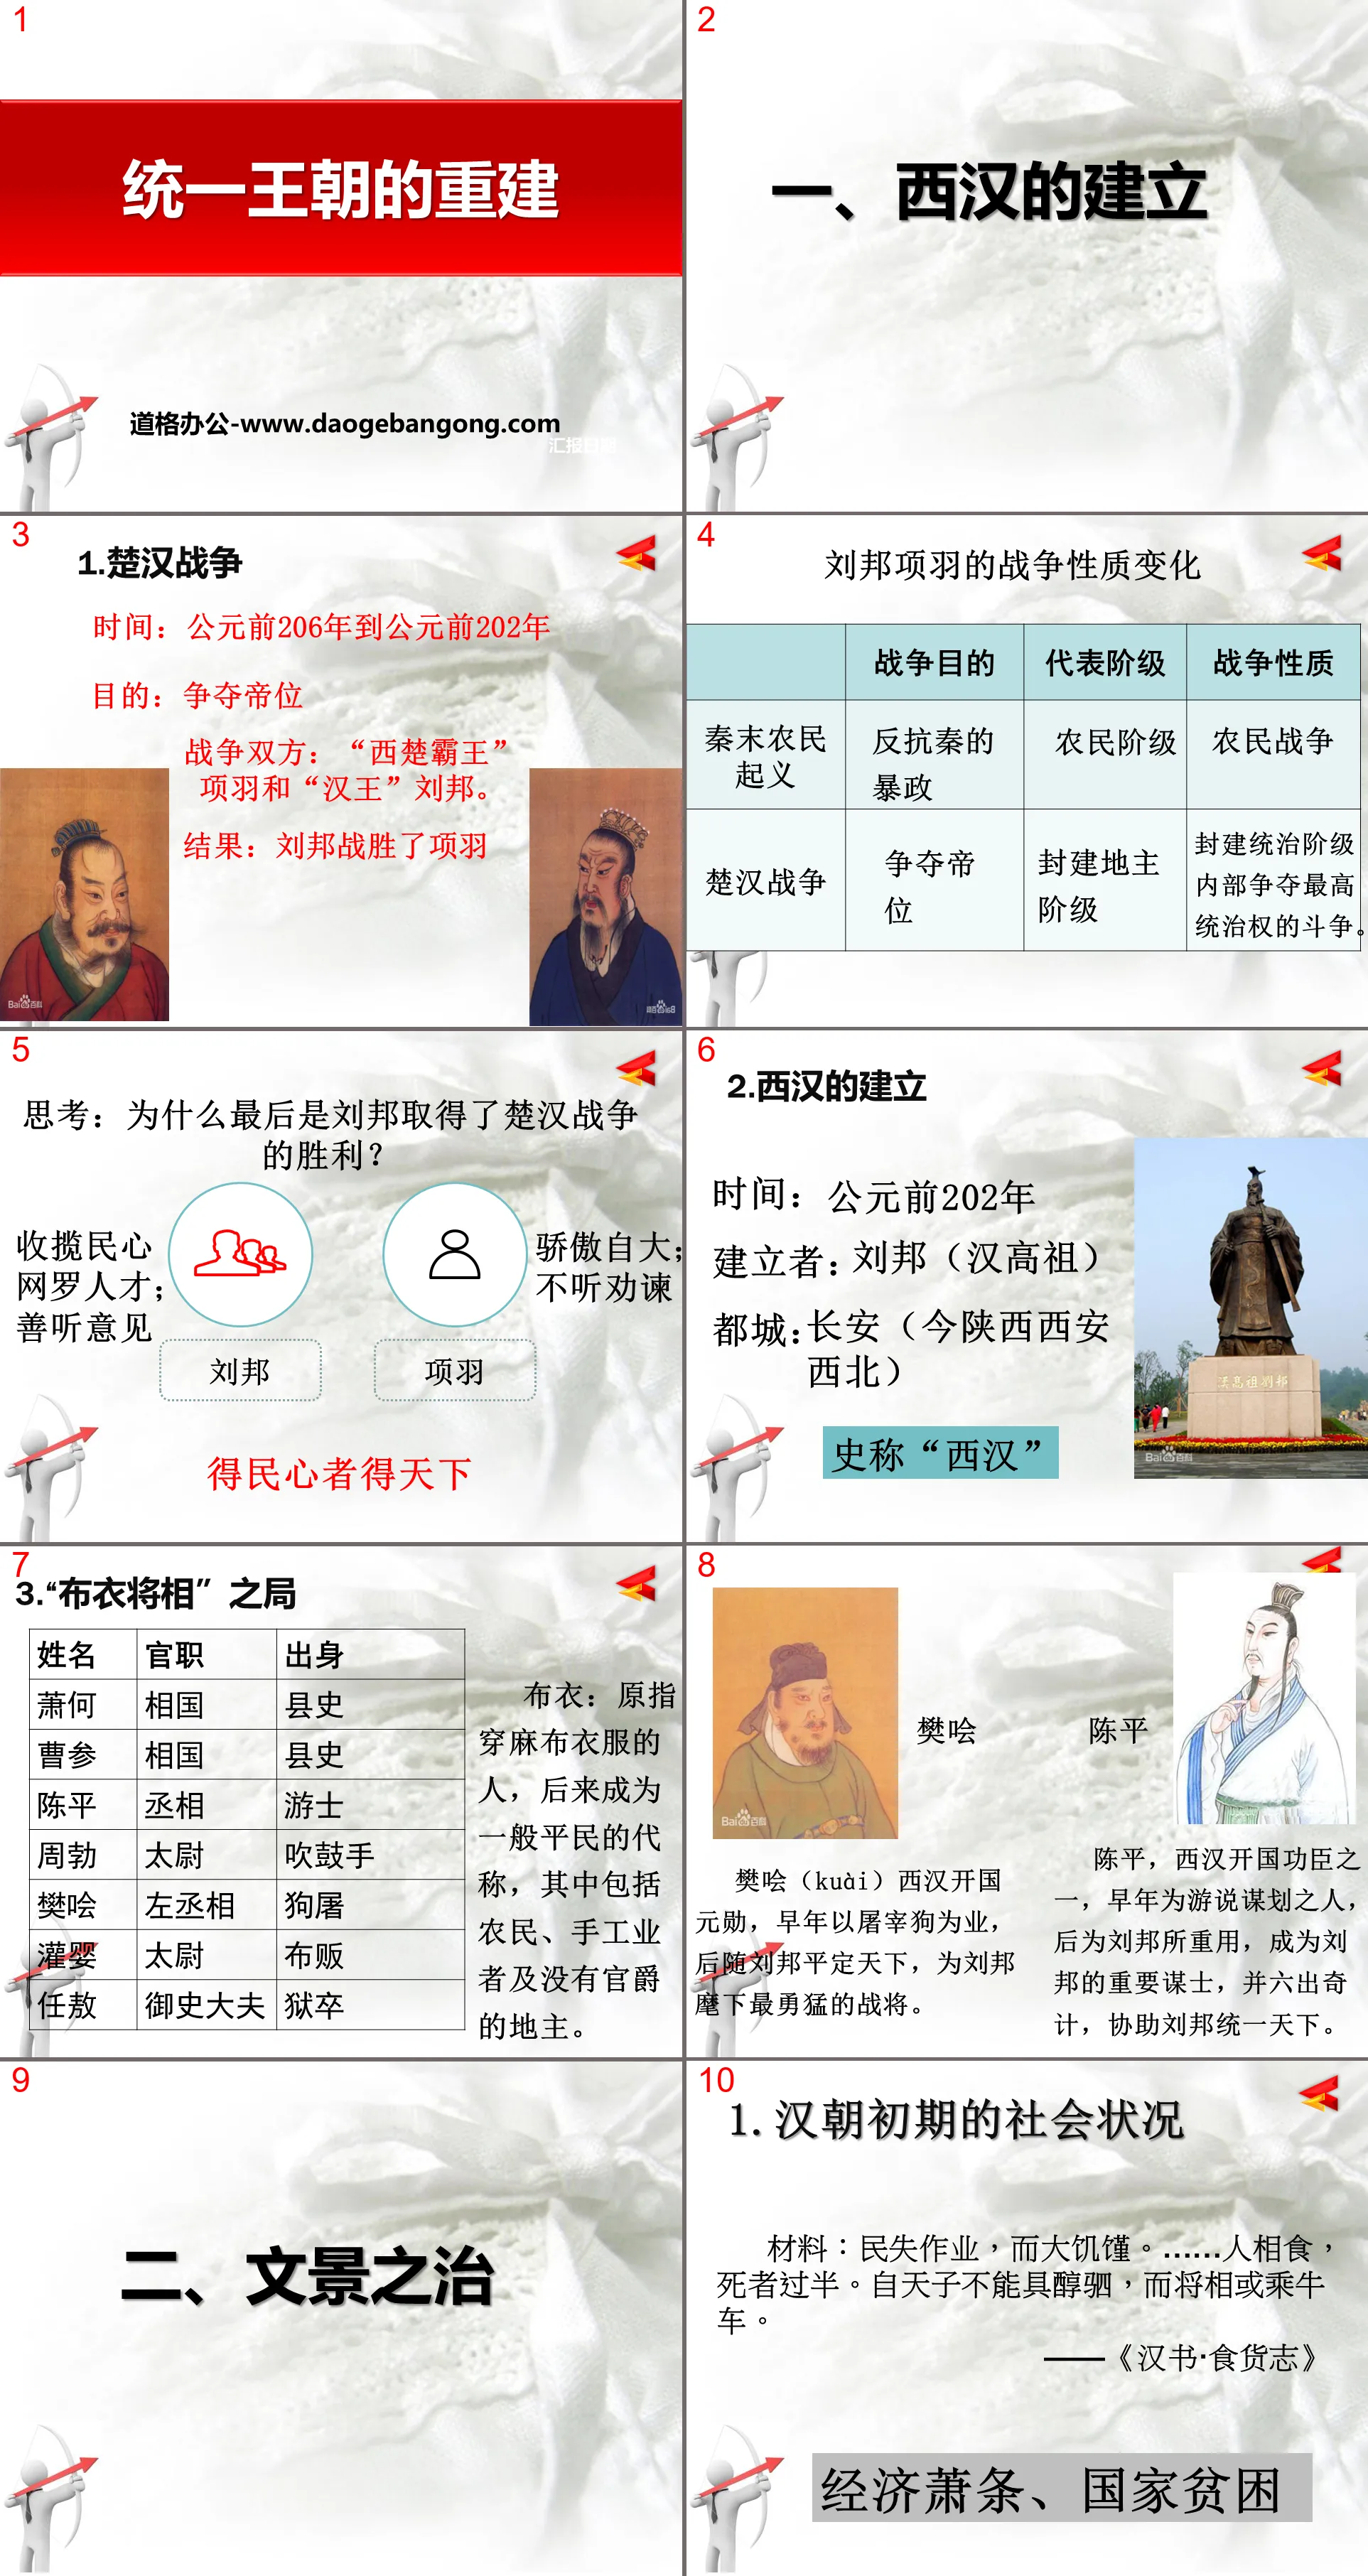 "Reconstruction of the Unified Dynasty" PPT courseware 3 during the Qin and Han Dynasties